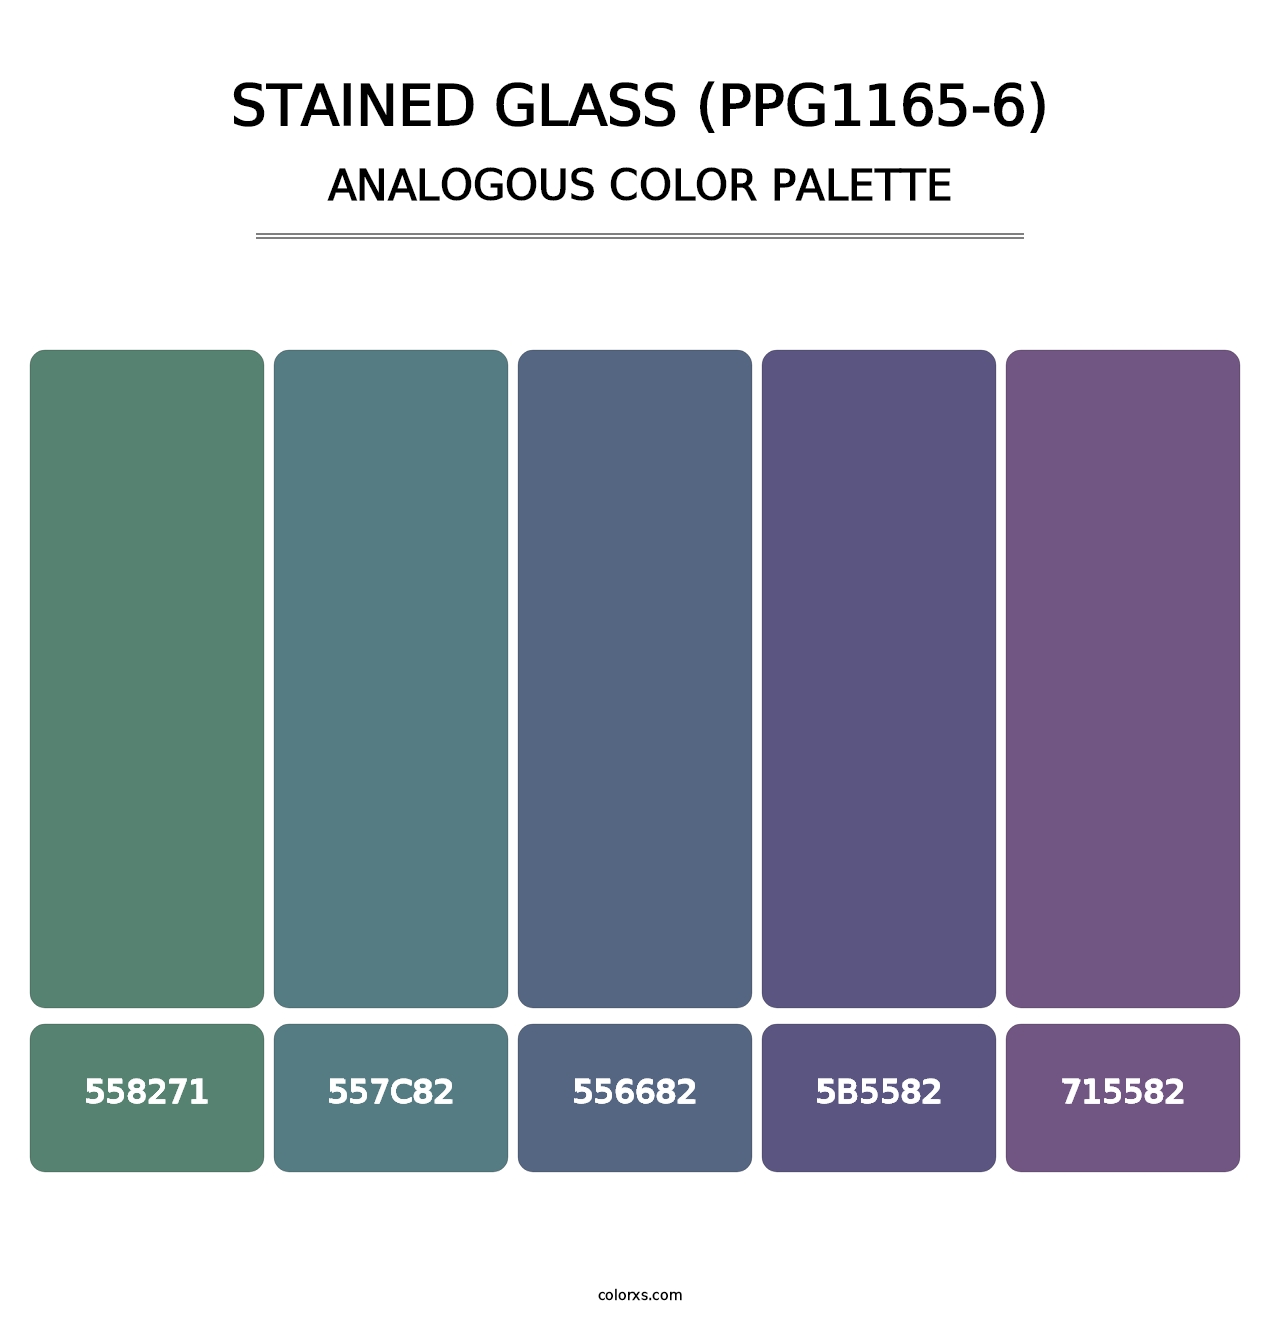 Stained Glass (PPG1165-6) - Analogous Color Palette